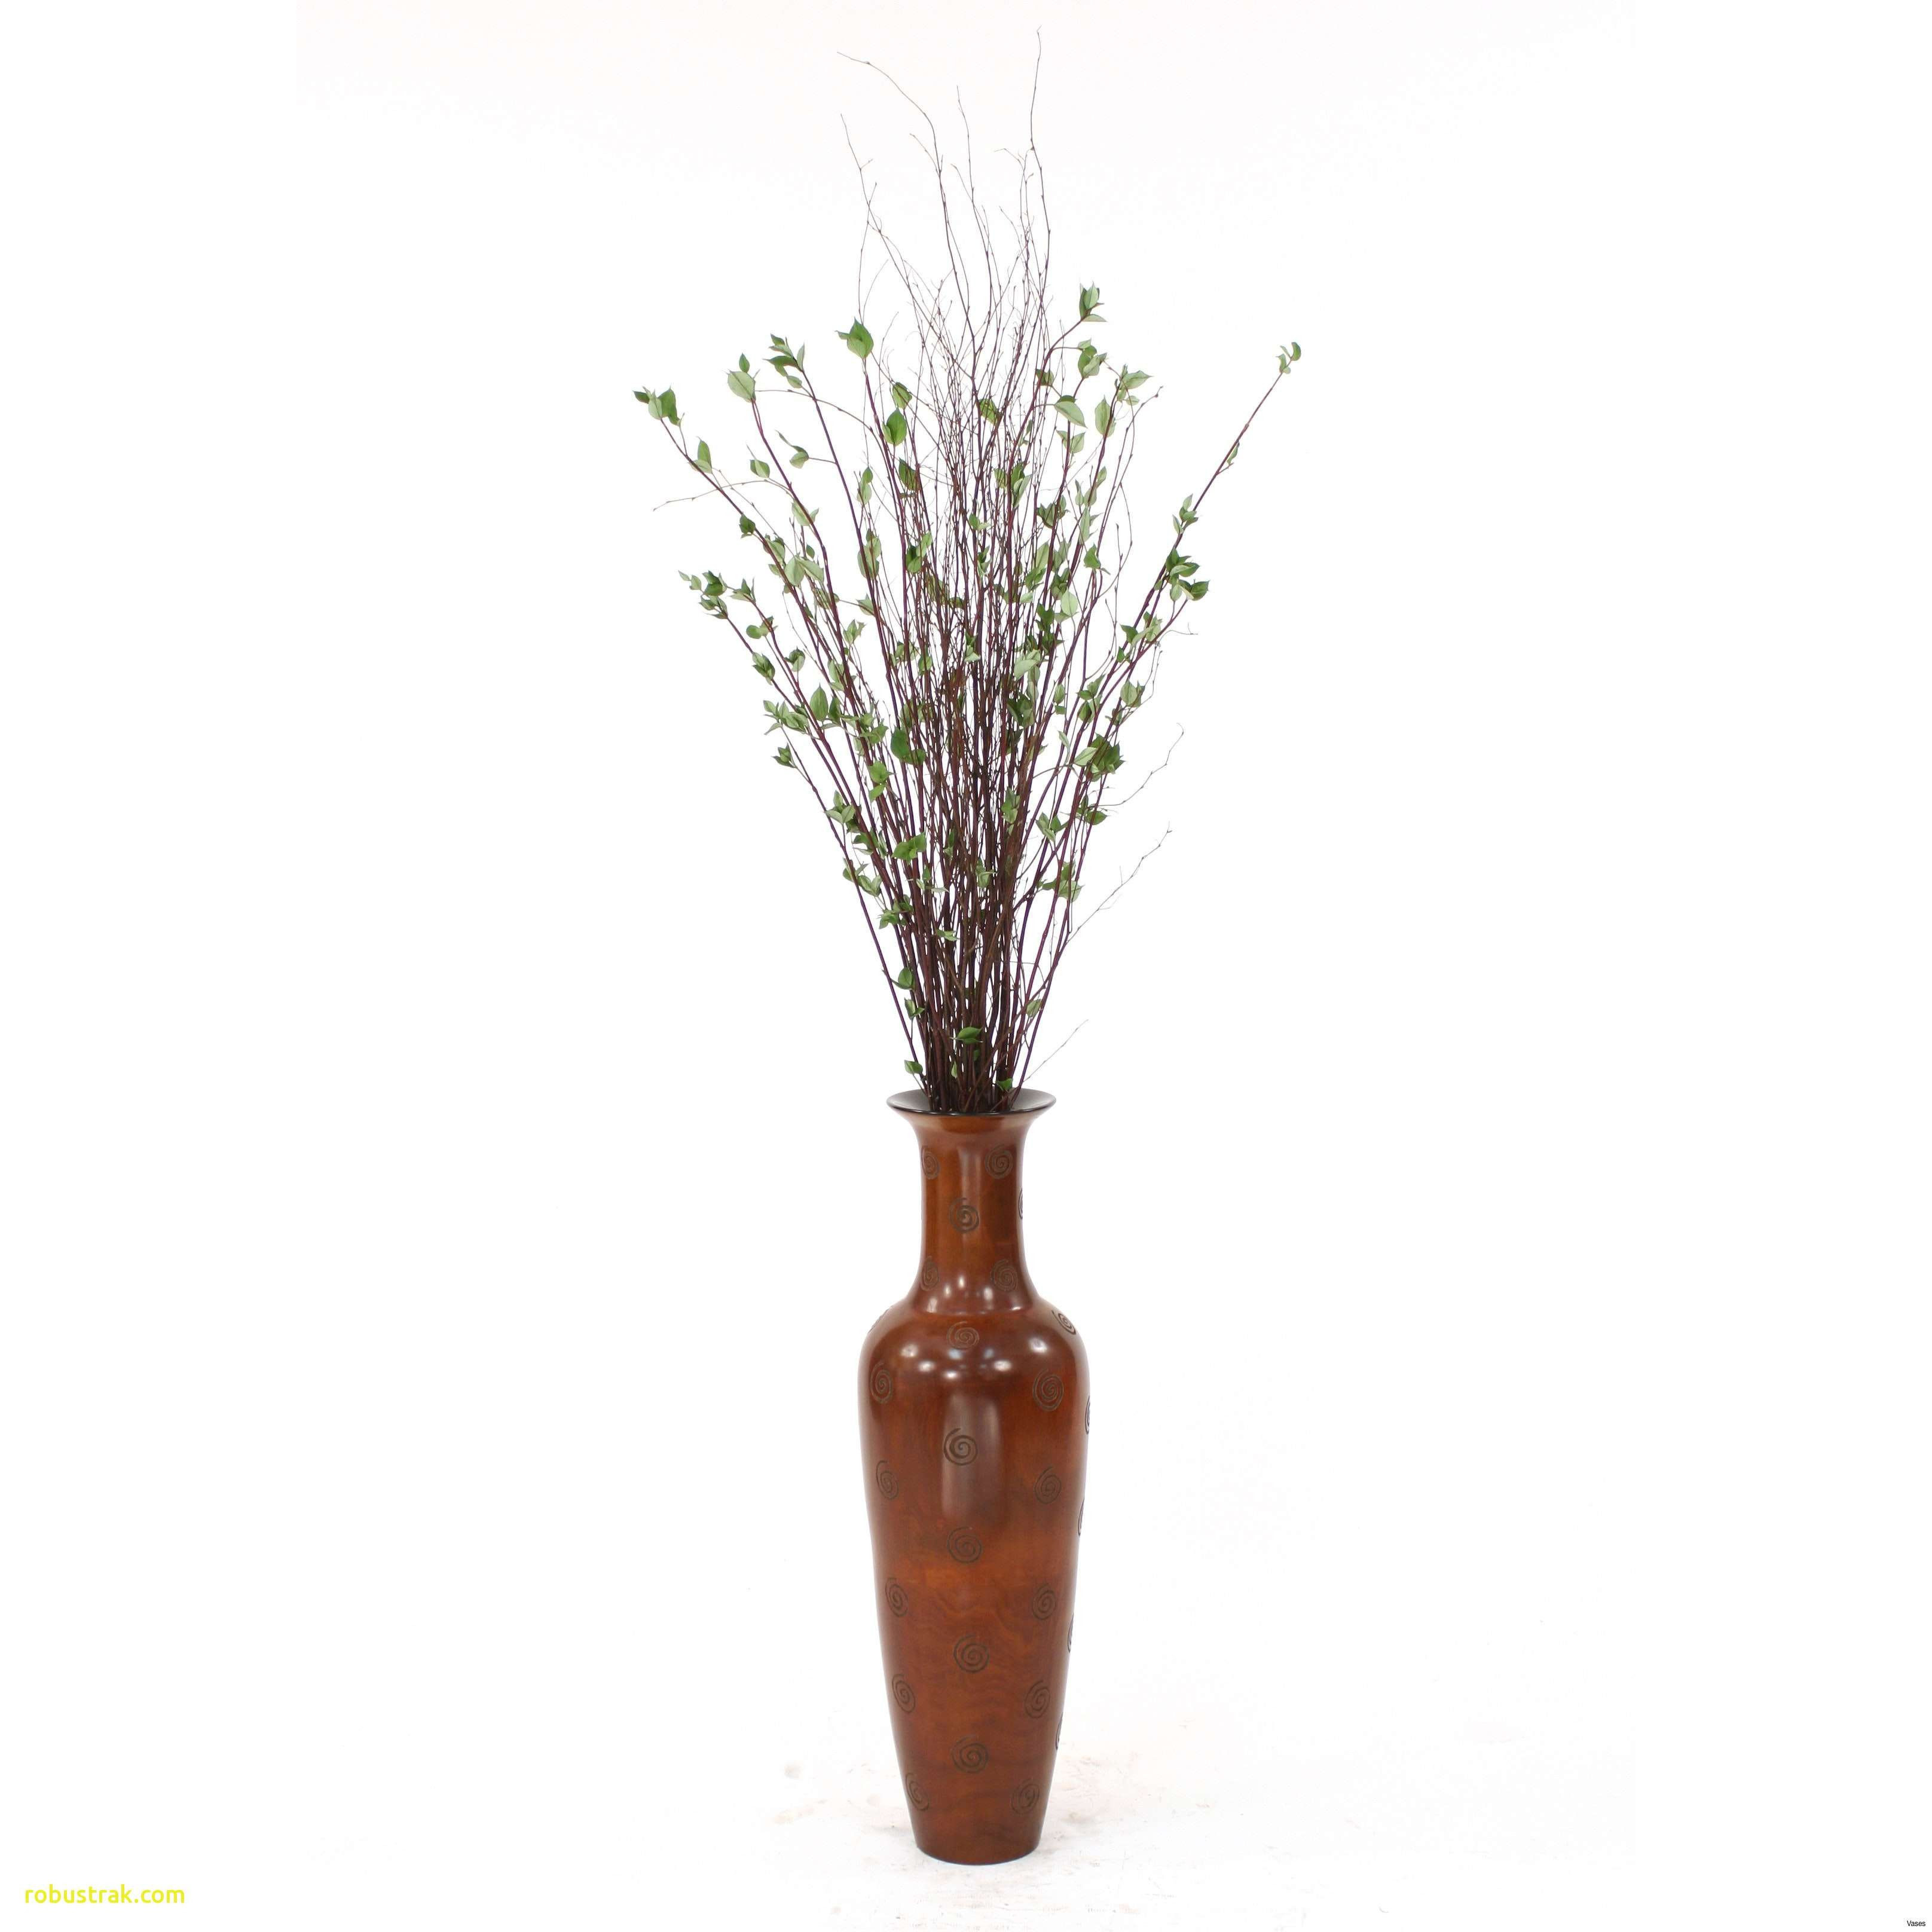 26 Lovable Tall Thin Blue Vase 2024 free download tall thin blue vase of tall red floor vase lovely floor vase with sticks elegant 10 ways to throughout tall red floor vase lovely floor vase with sticks elegant 10 ways to fill empty corners